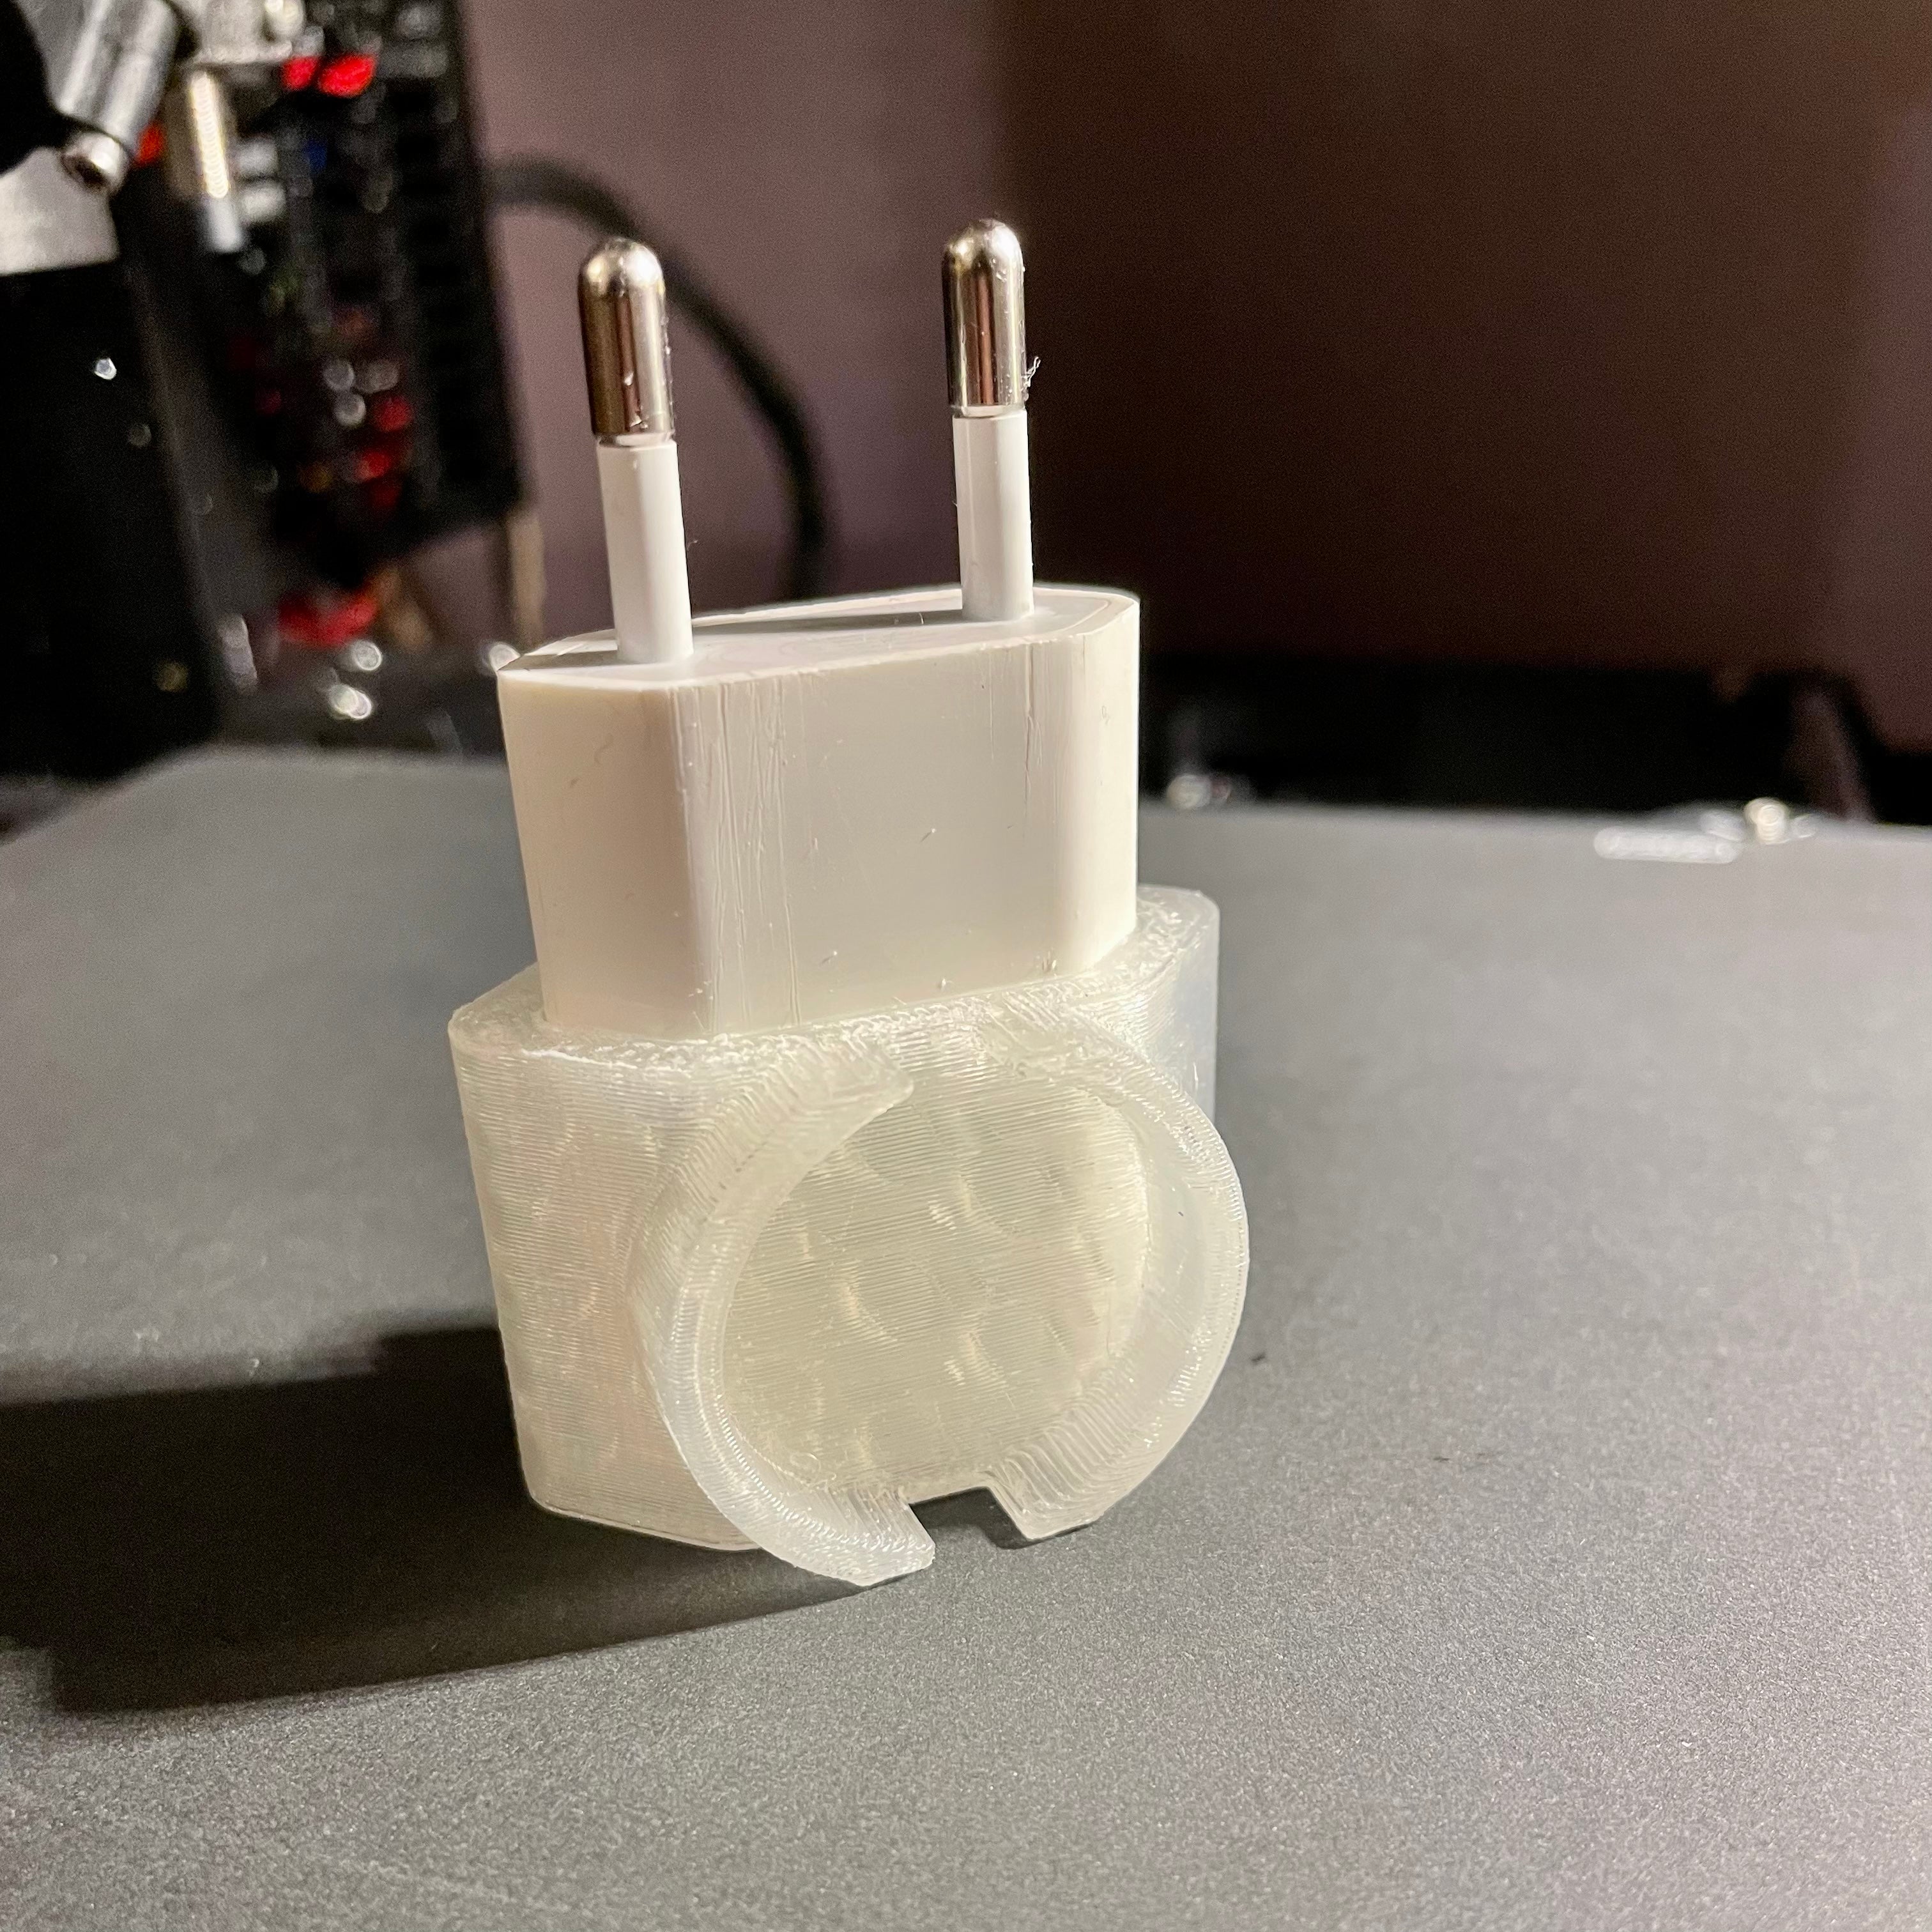 Apple Watch Charging Stand V2